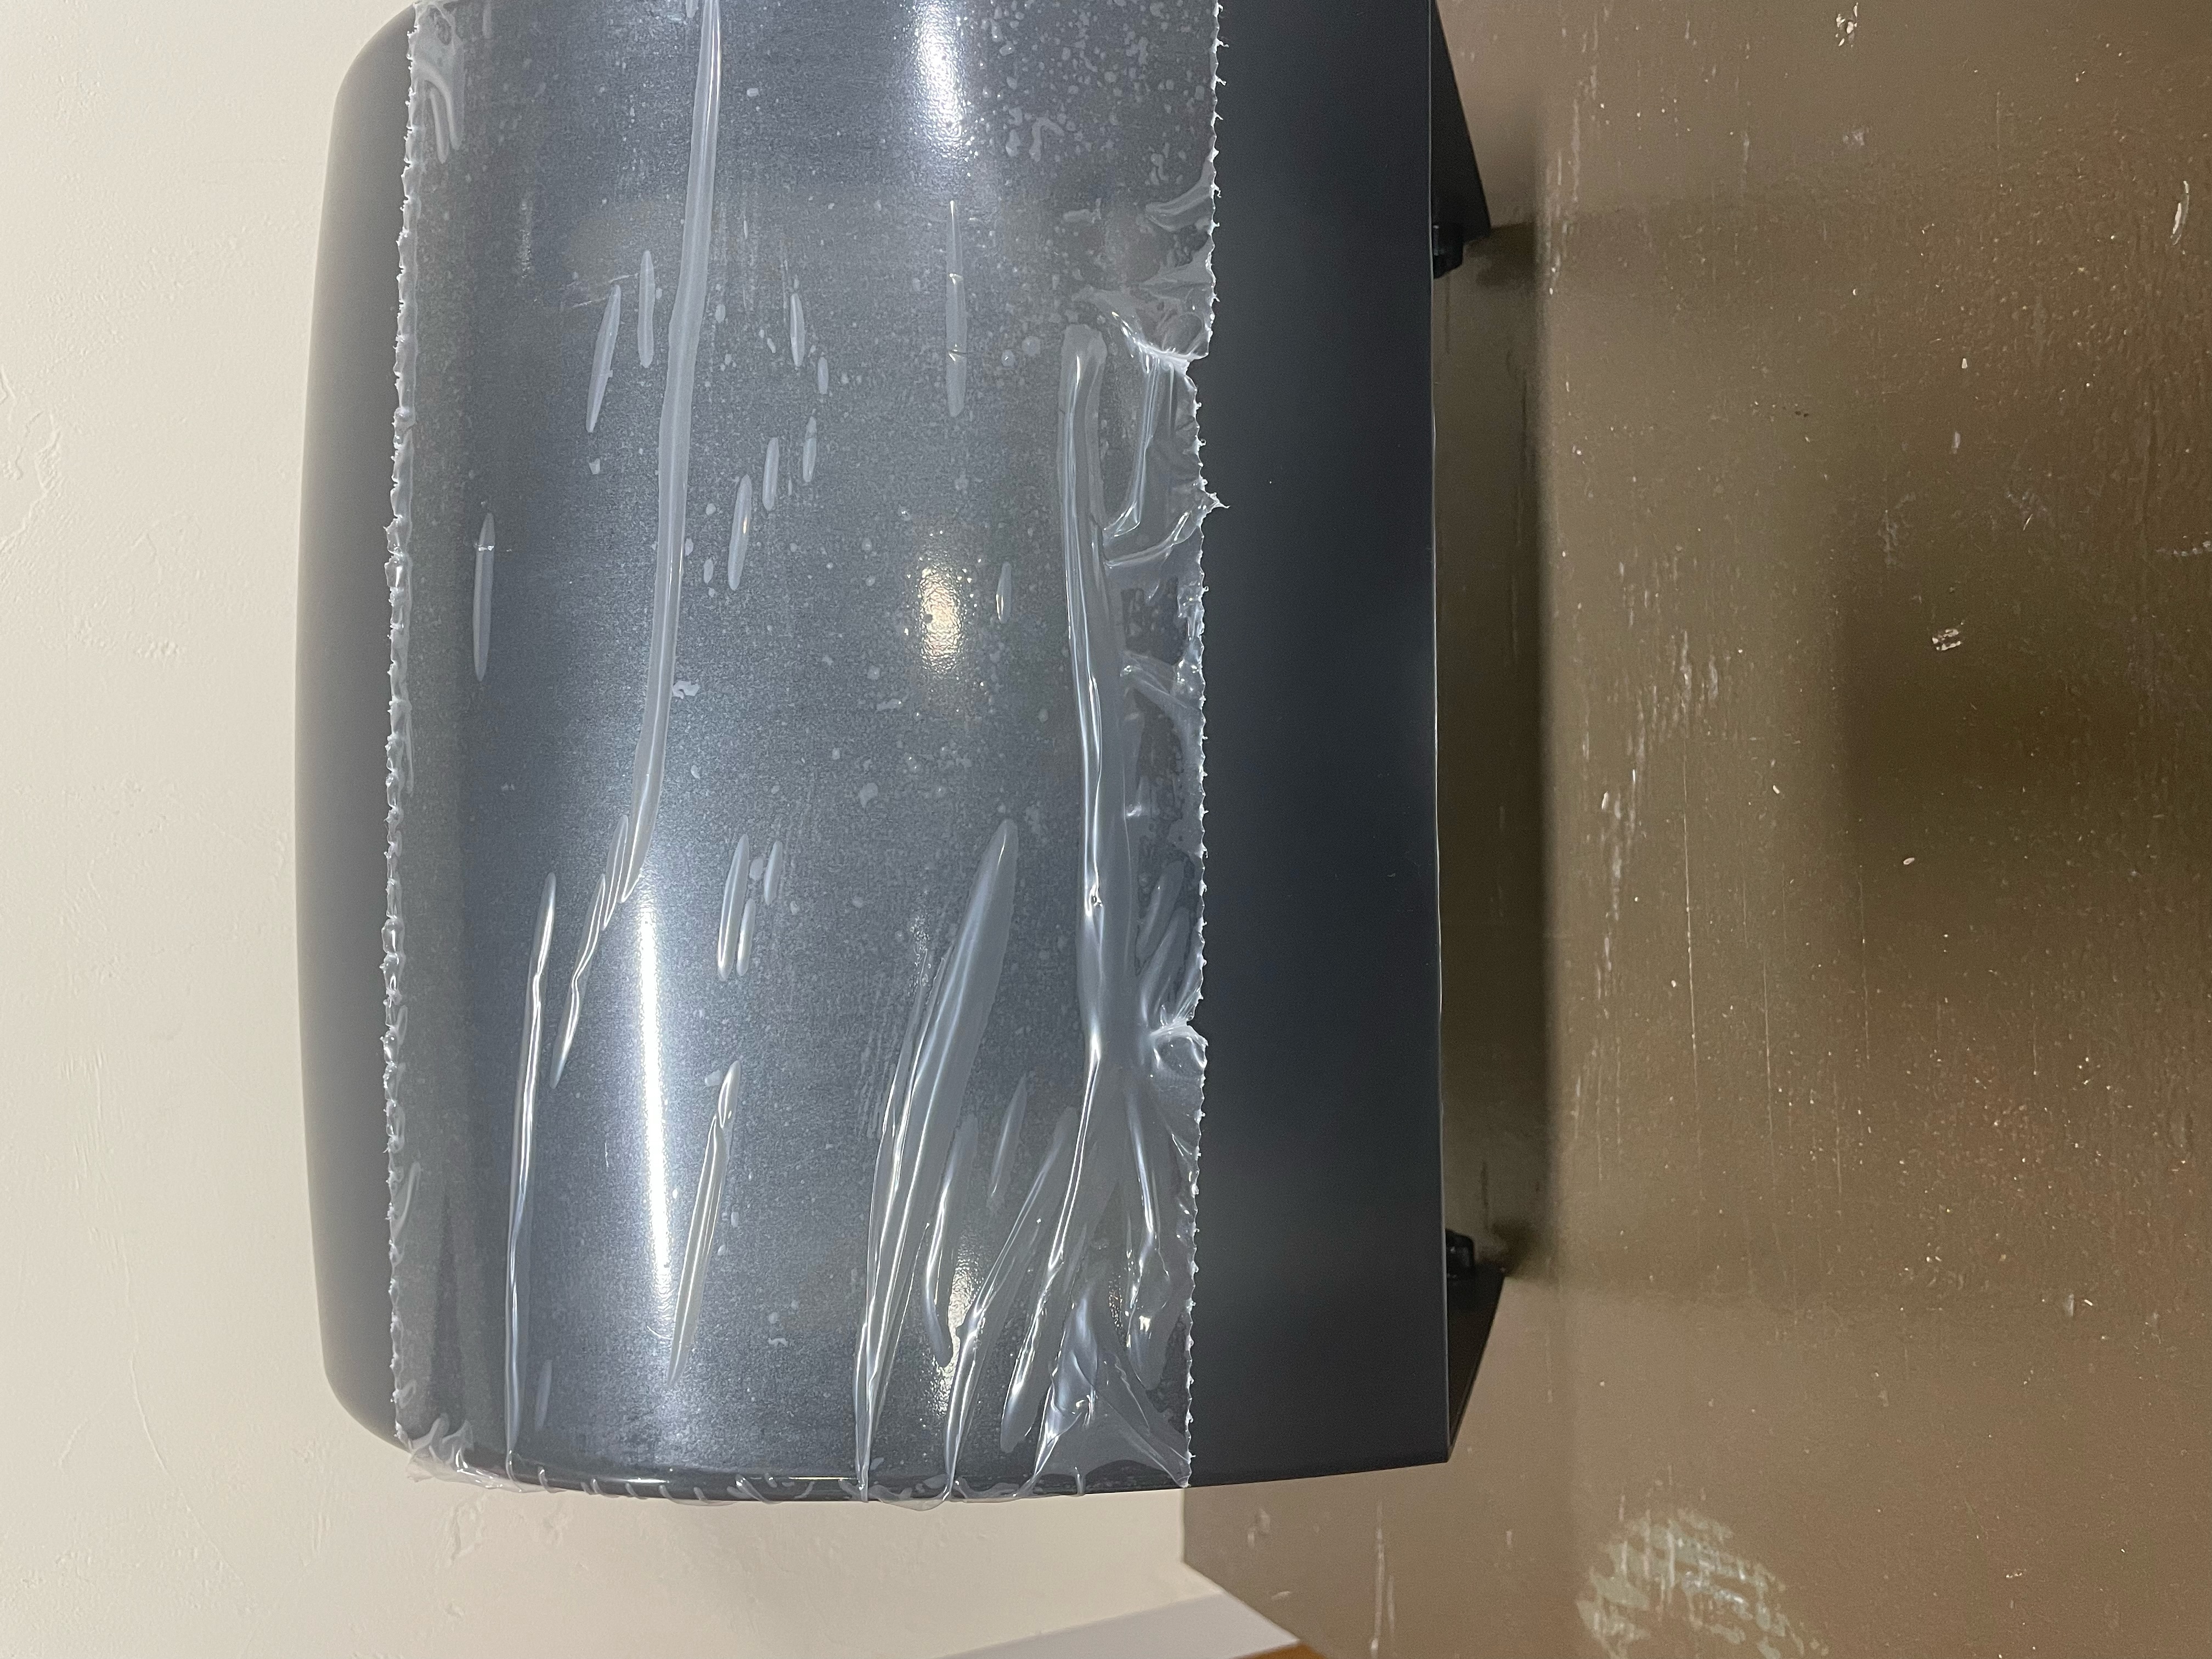 COVER REPLACEMENT FOR T245TS
DISPENSER